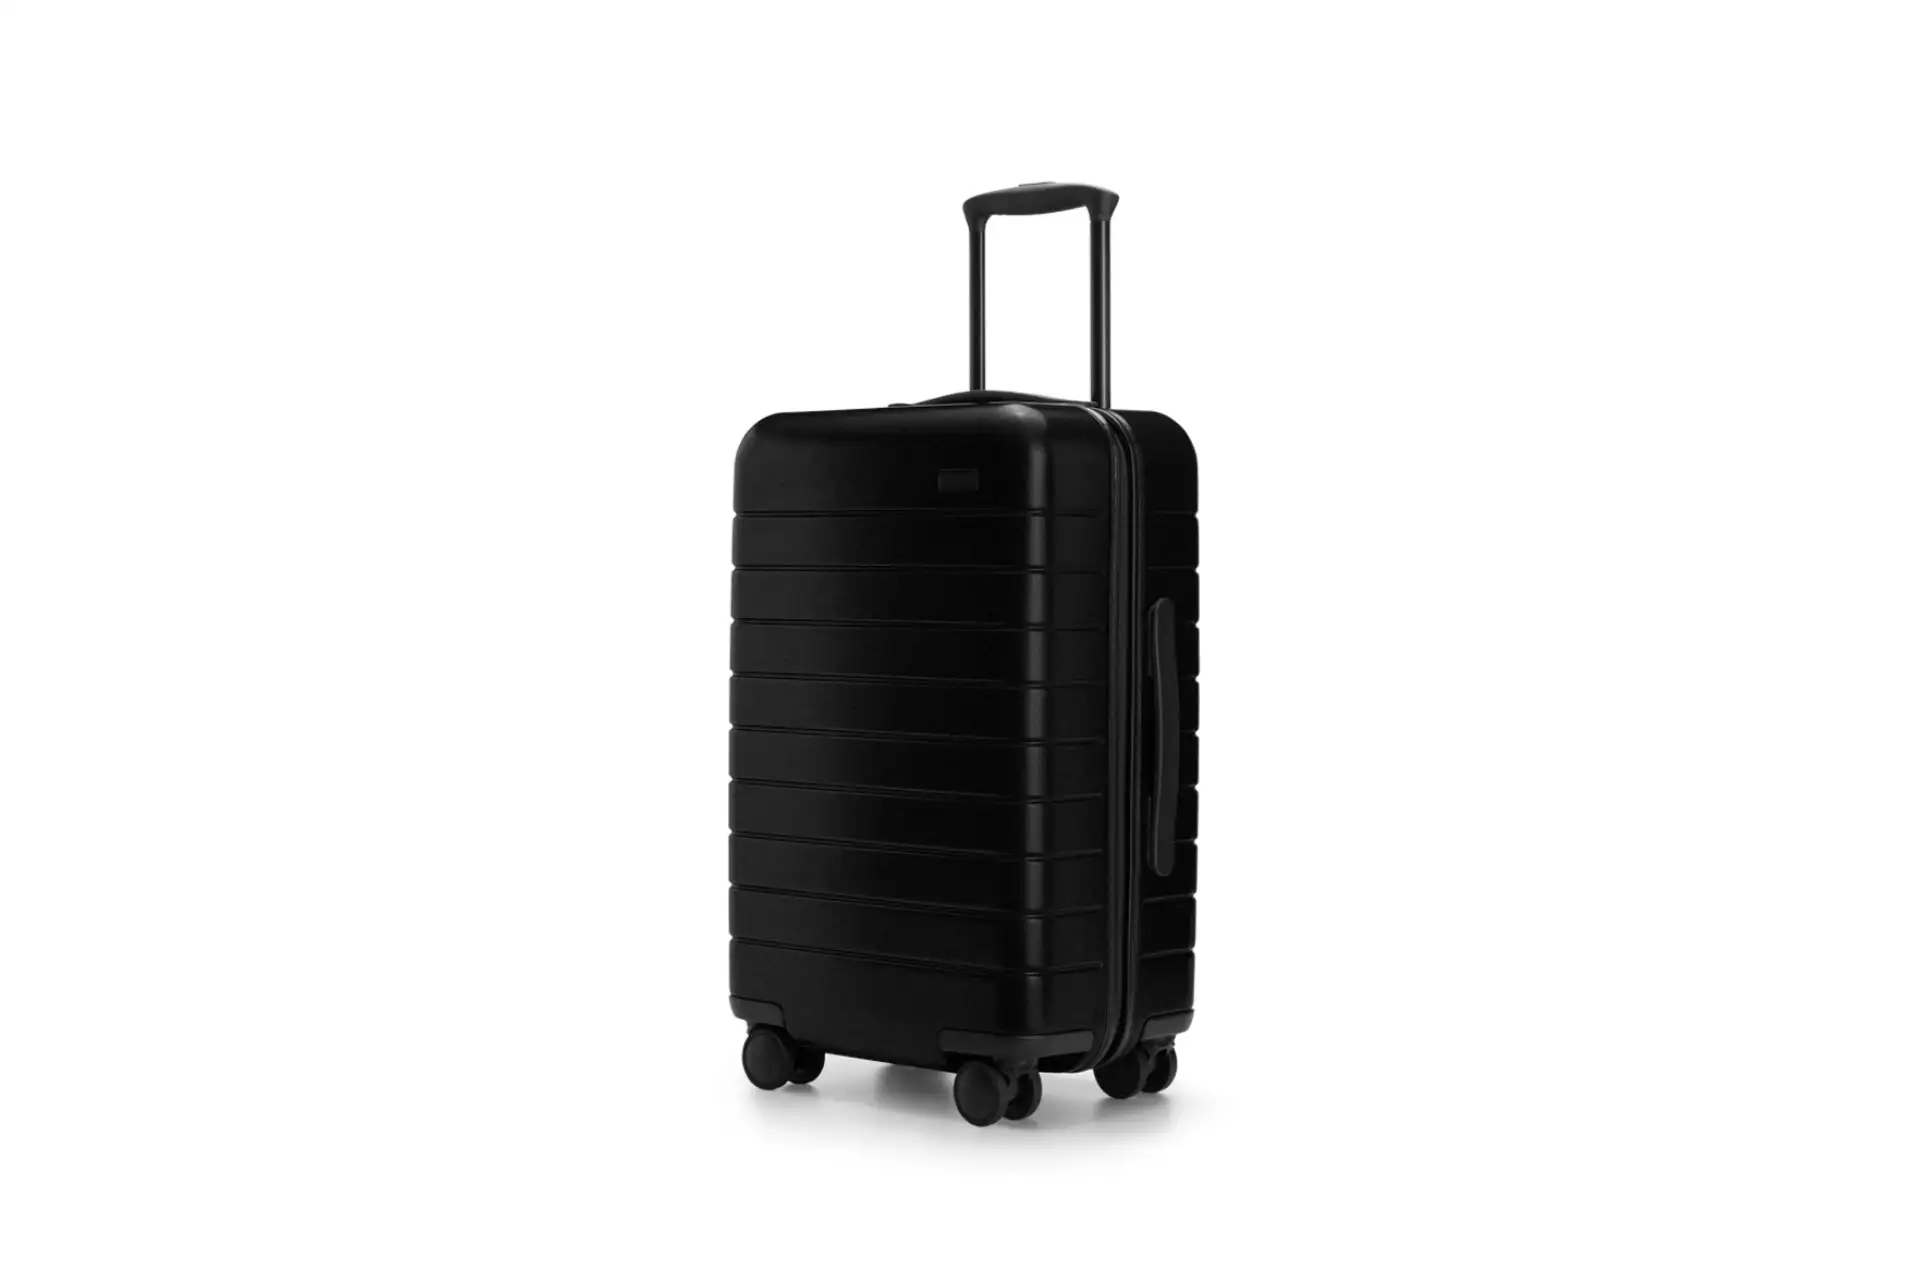 Away Travel Carry On Bag; Courtesy of Away